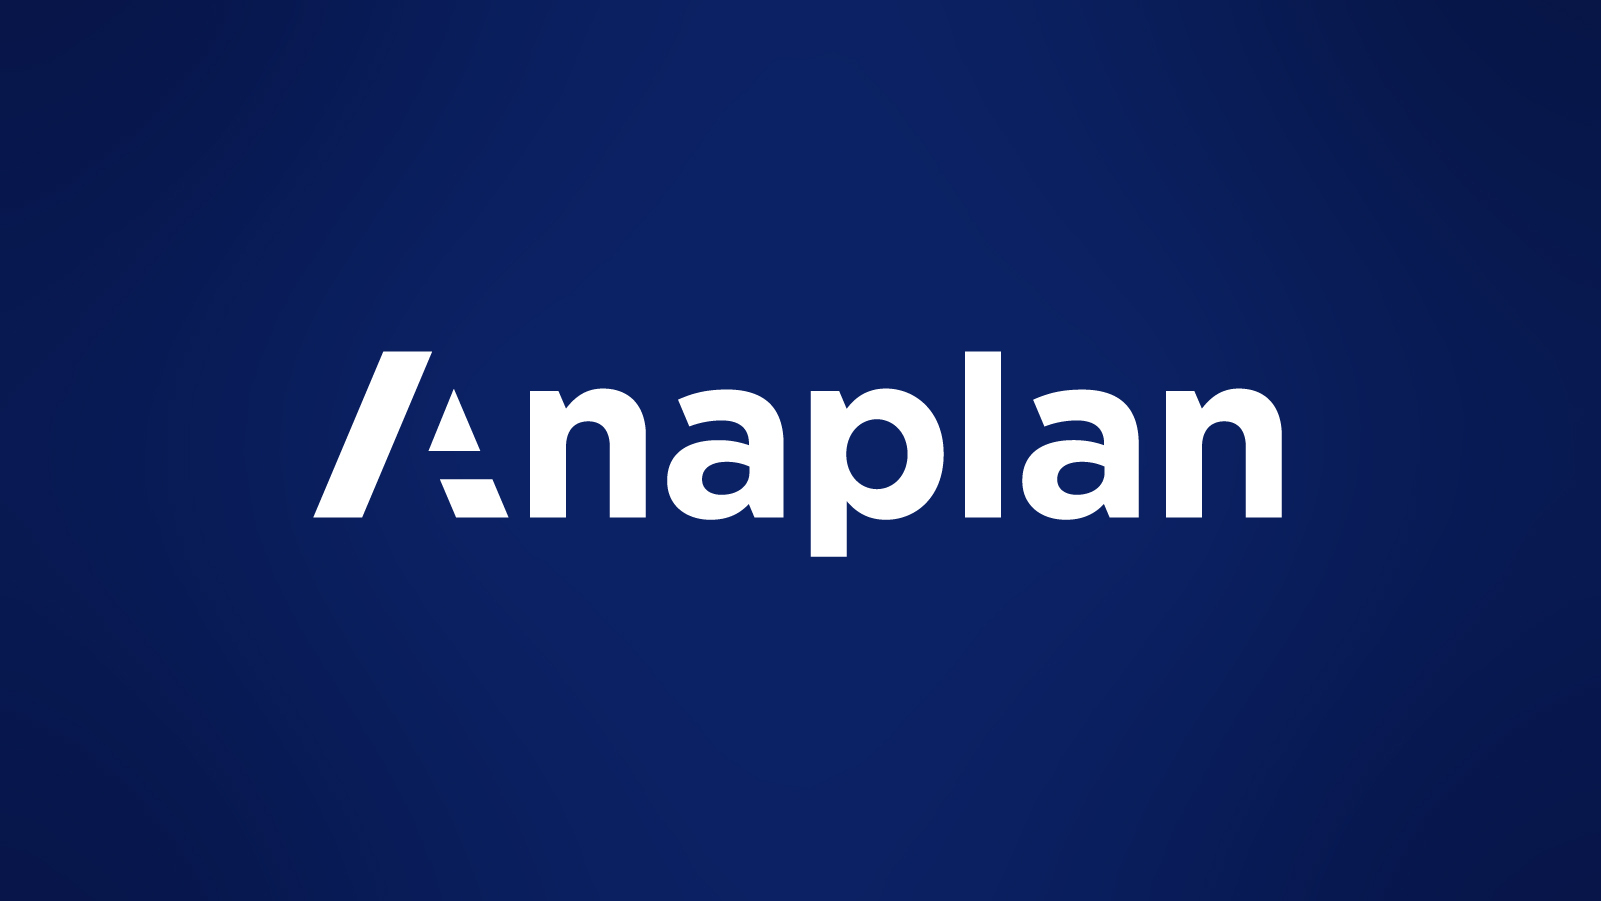 Graphic: Anaplan logo on navy blue background